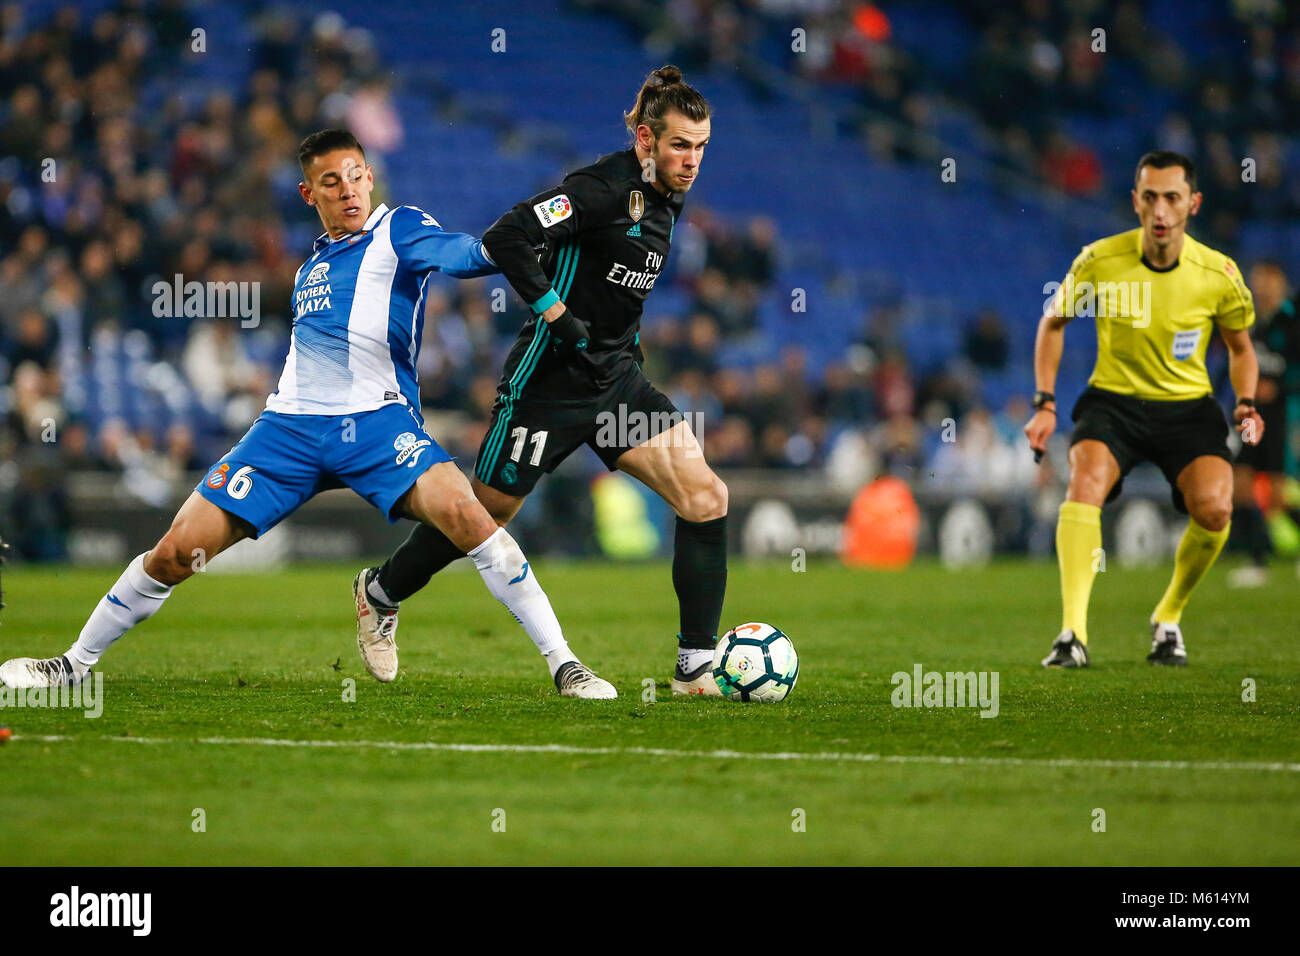 Barcelona, Spain. 27th Feb, 2018. Bale during the match between RCD Espanyol v Real Madrid, for the round 26 of the Liga Santander, played at RCDE Stadium on 27th February 2018 in Barcelona, Spain. Credit: Gtres Información más Comuniación on line, S.L./Alamy Live News Stock Photo